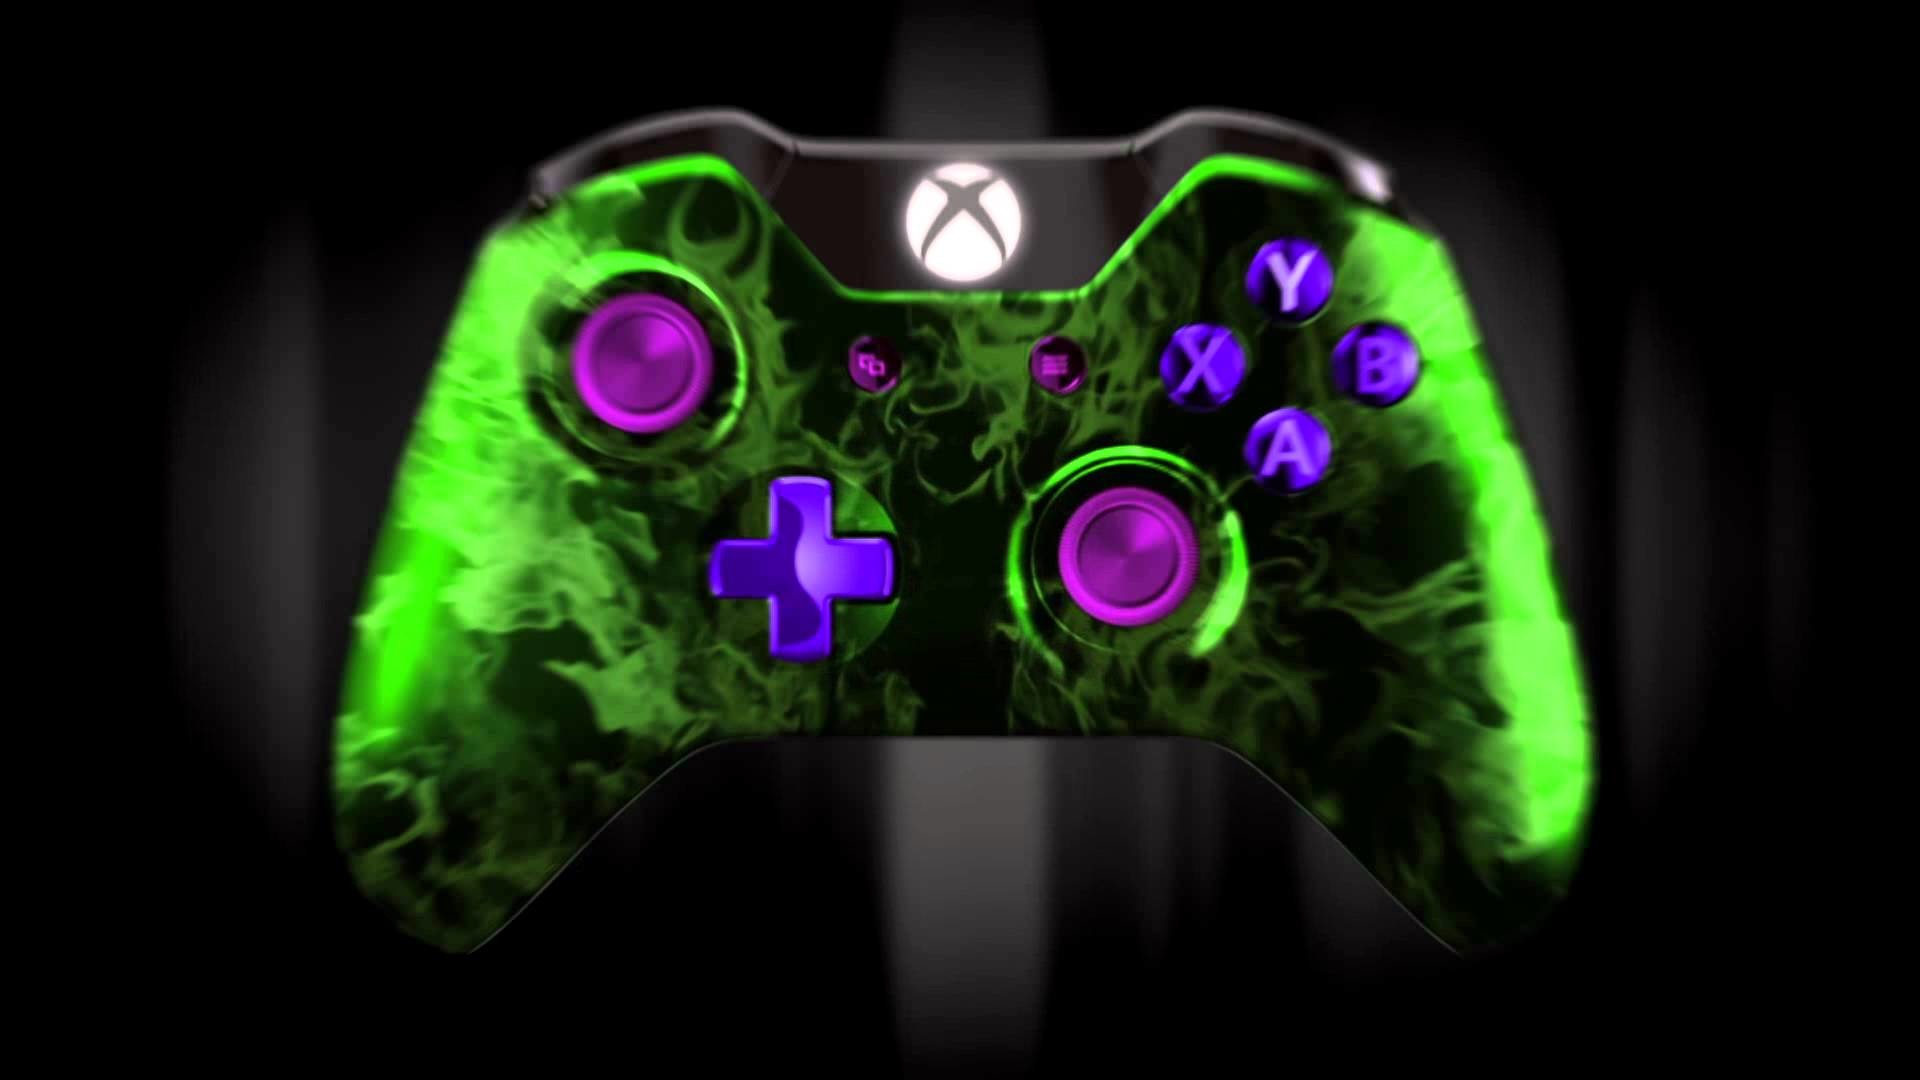 1920x1080 The best custom xbox one controllers - LottwoieLibuttesrell2's soup